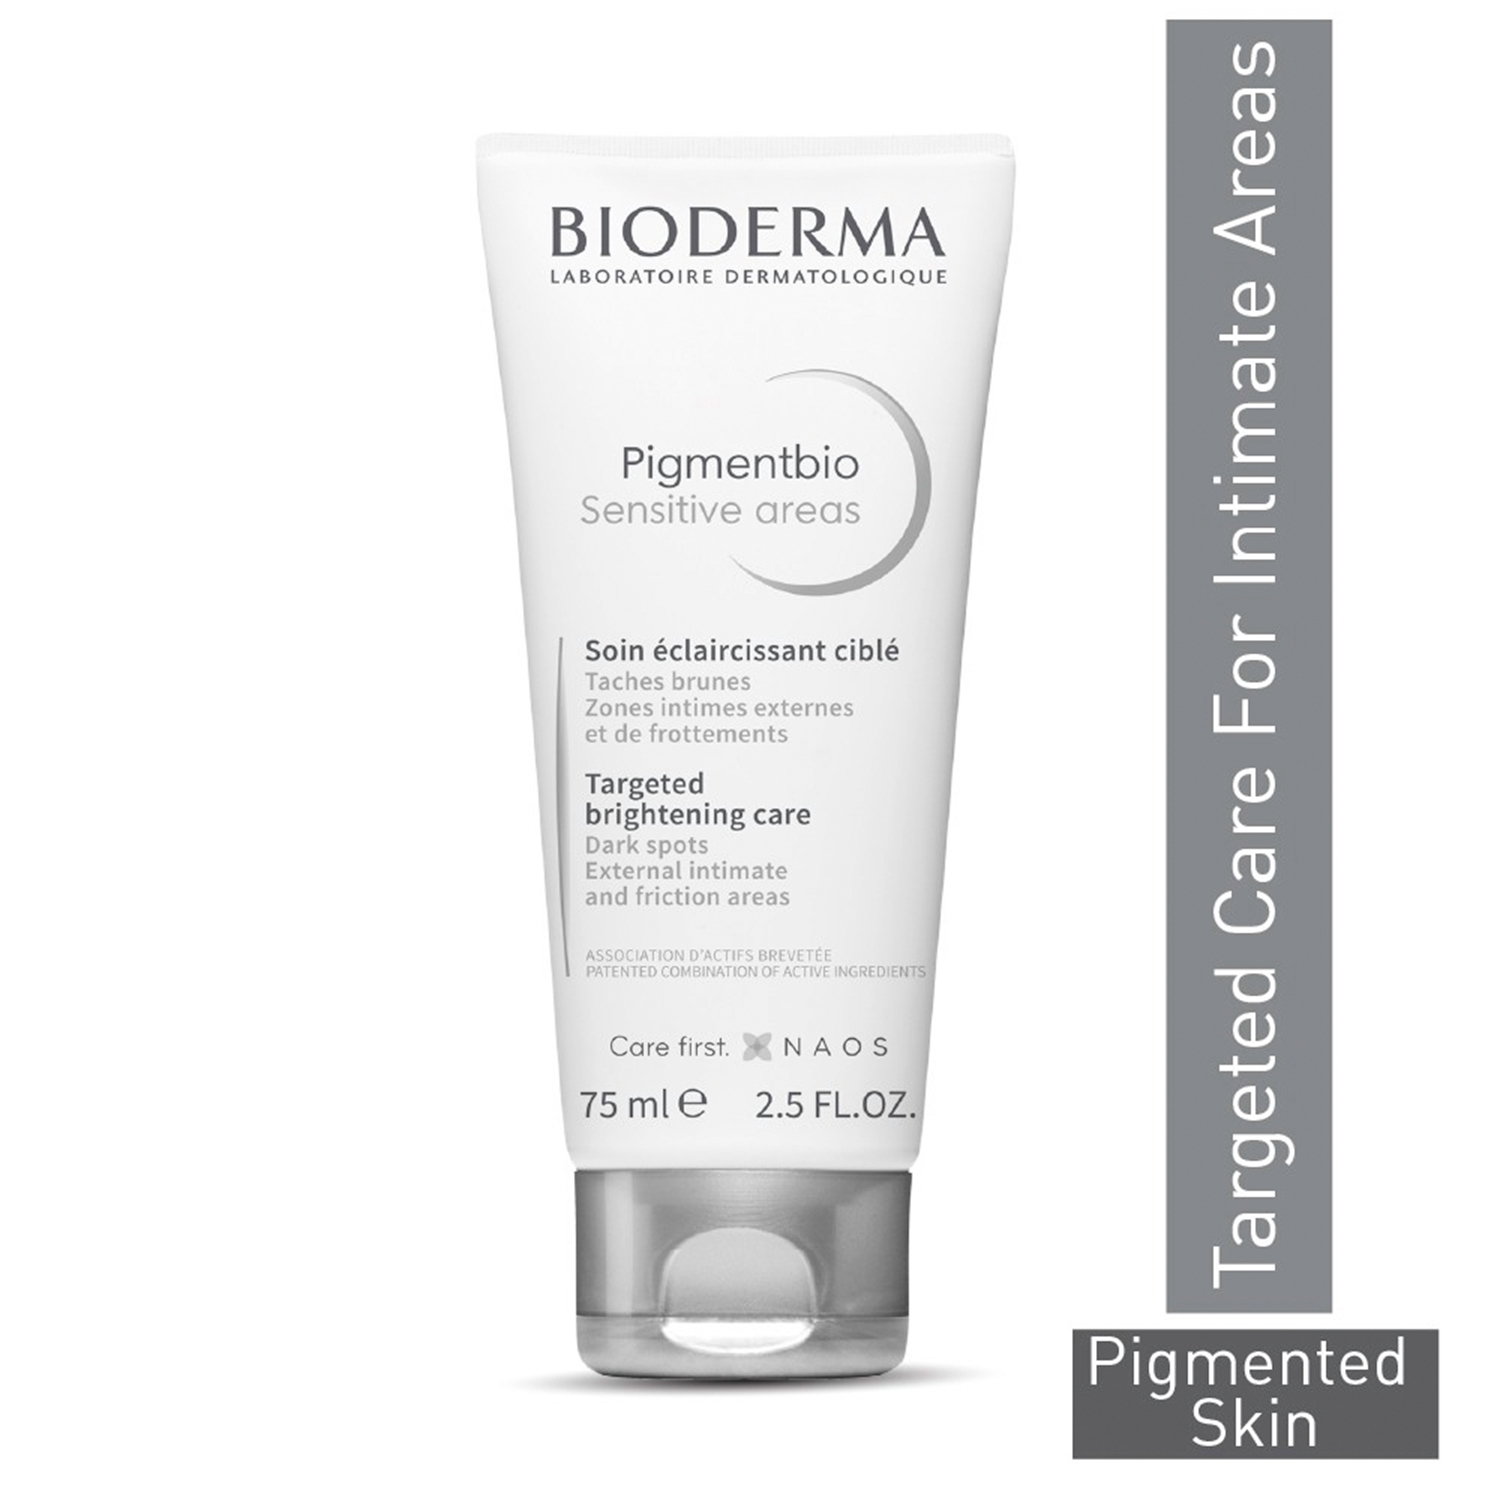 Bioderma | Bioderma Pigmentbio Sensitive Areas External Intimate And Friction Areas Brightening Care (75ml)